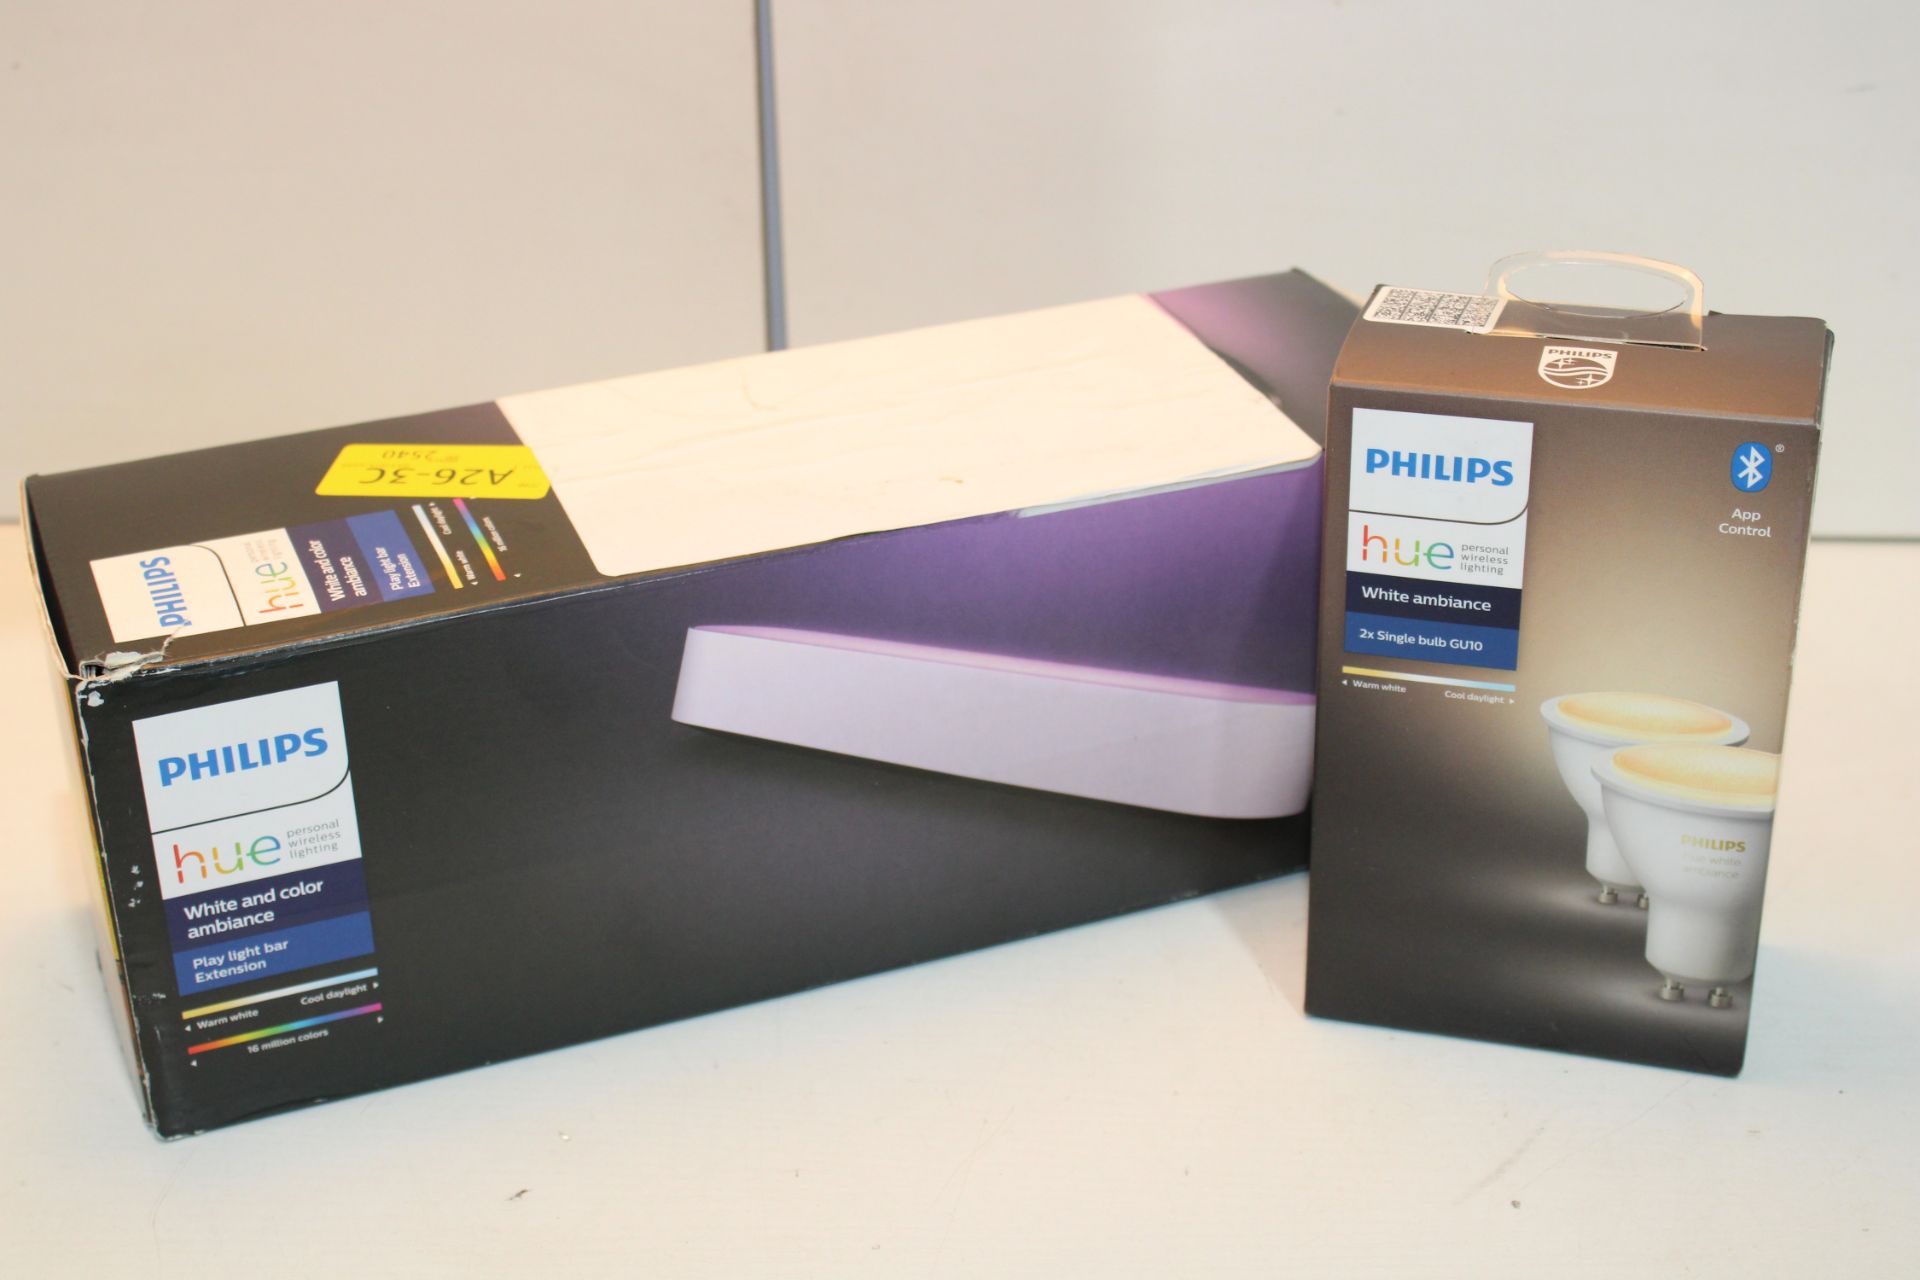 2X ASSORTED PHILIPS HUE PERSONAL WIRELESS LIGHTING ITEMS COMBINED RRP £110.00Condition